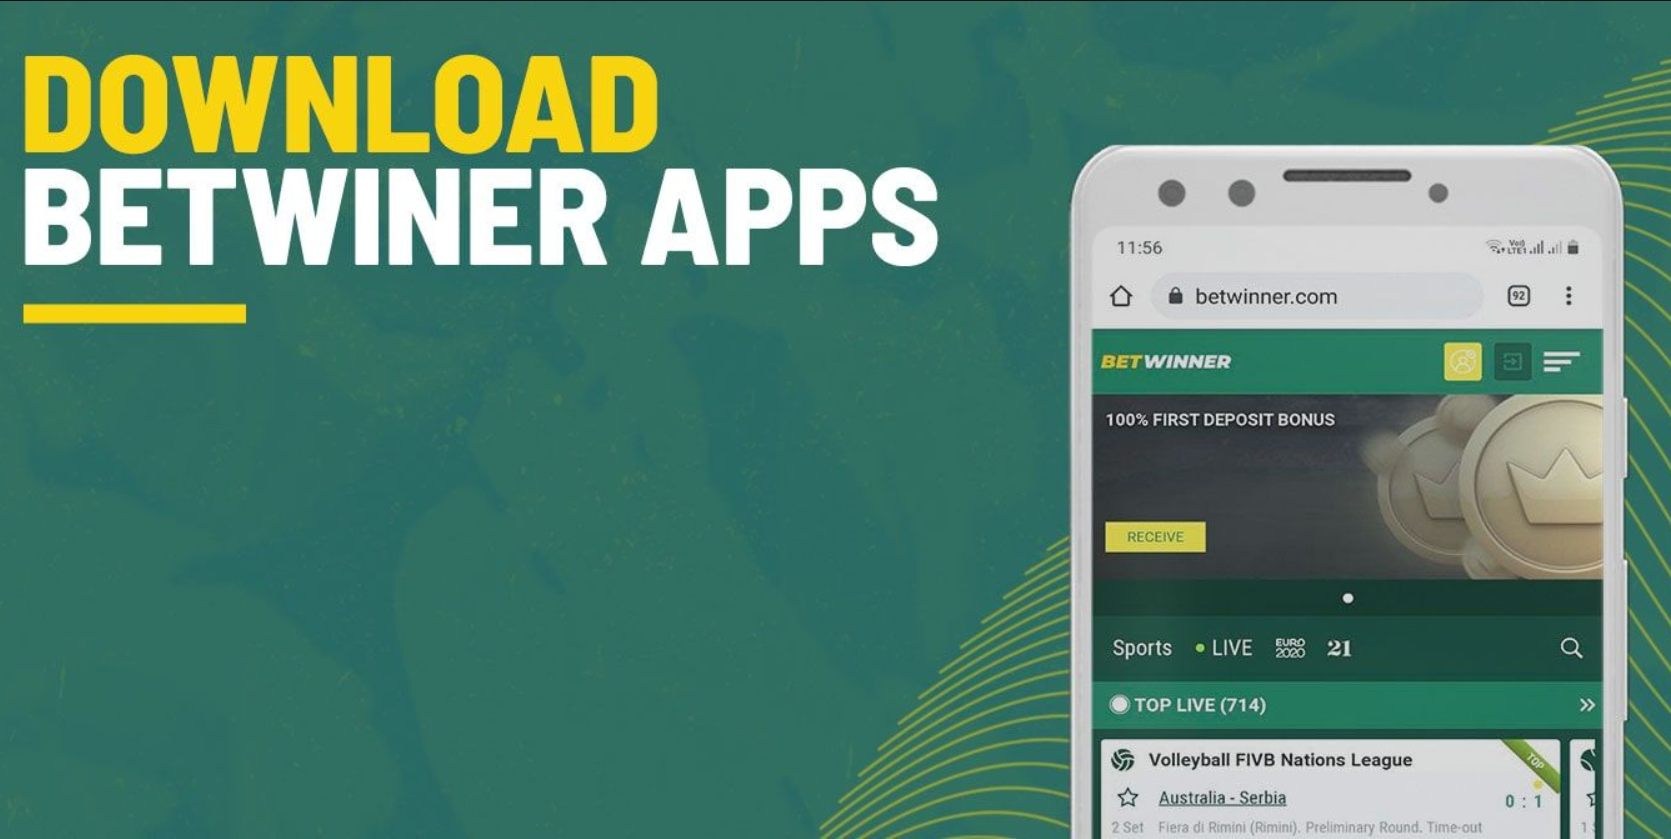 How to use the Betwinner app: main features of the app